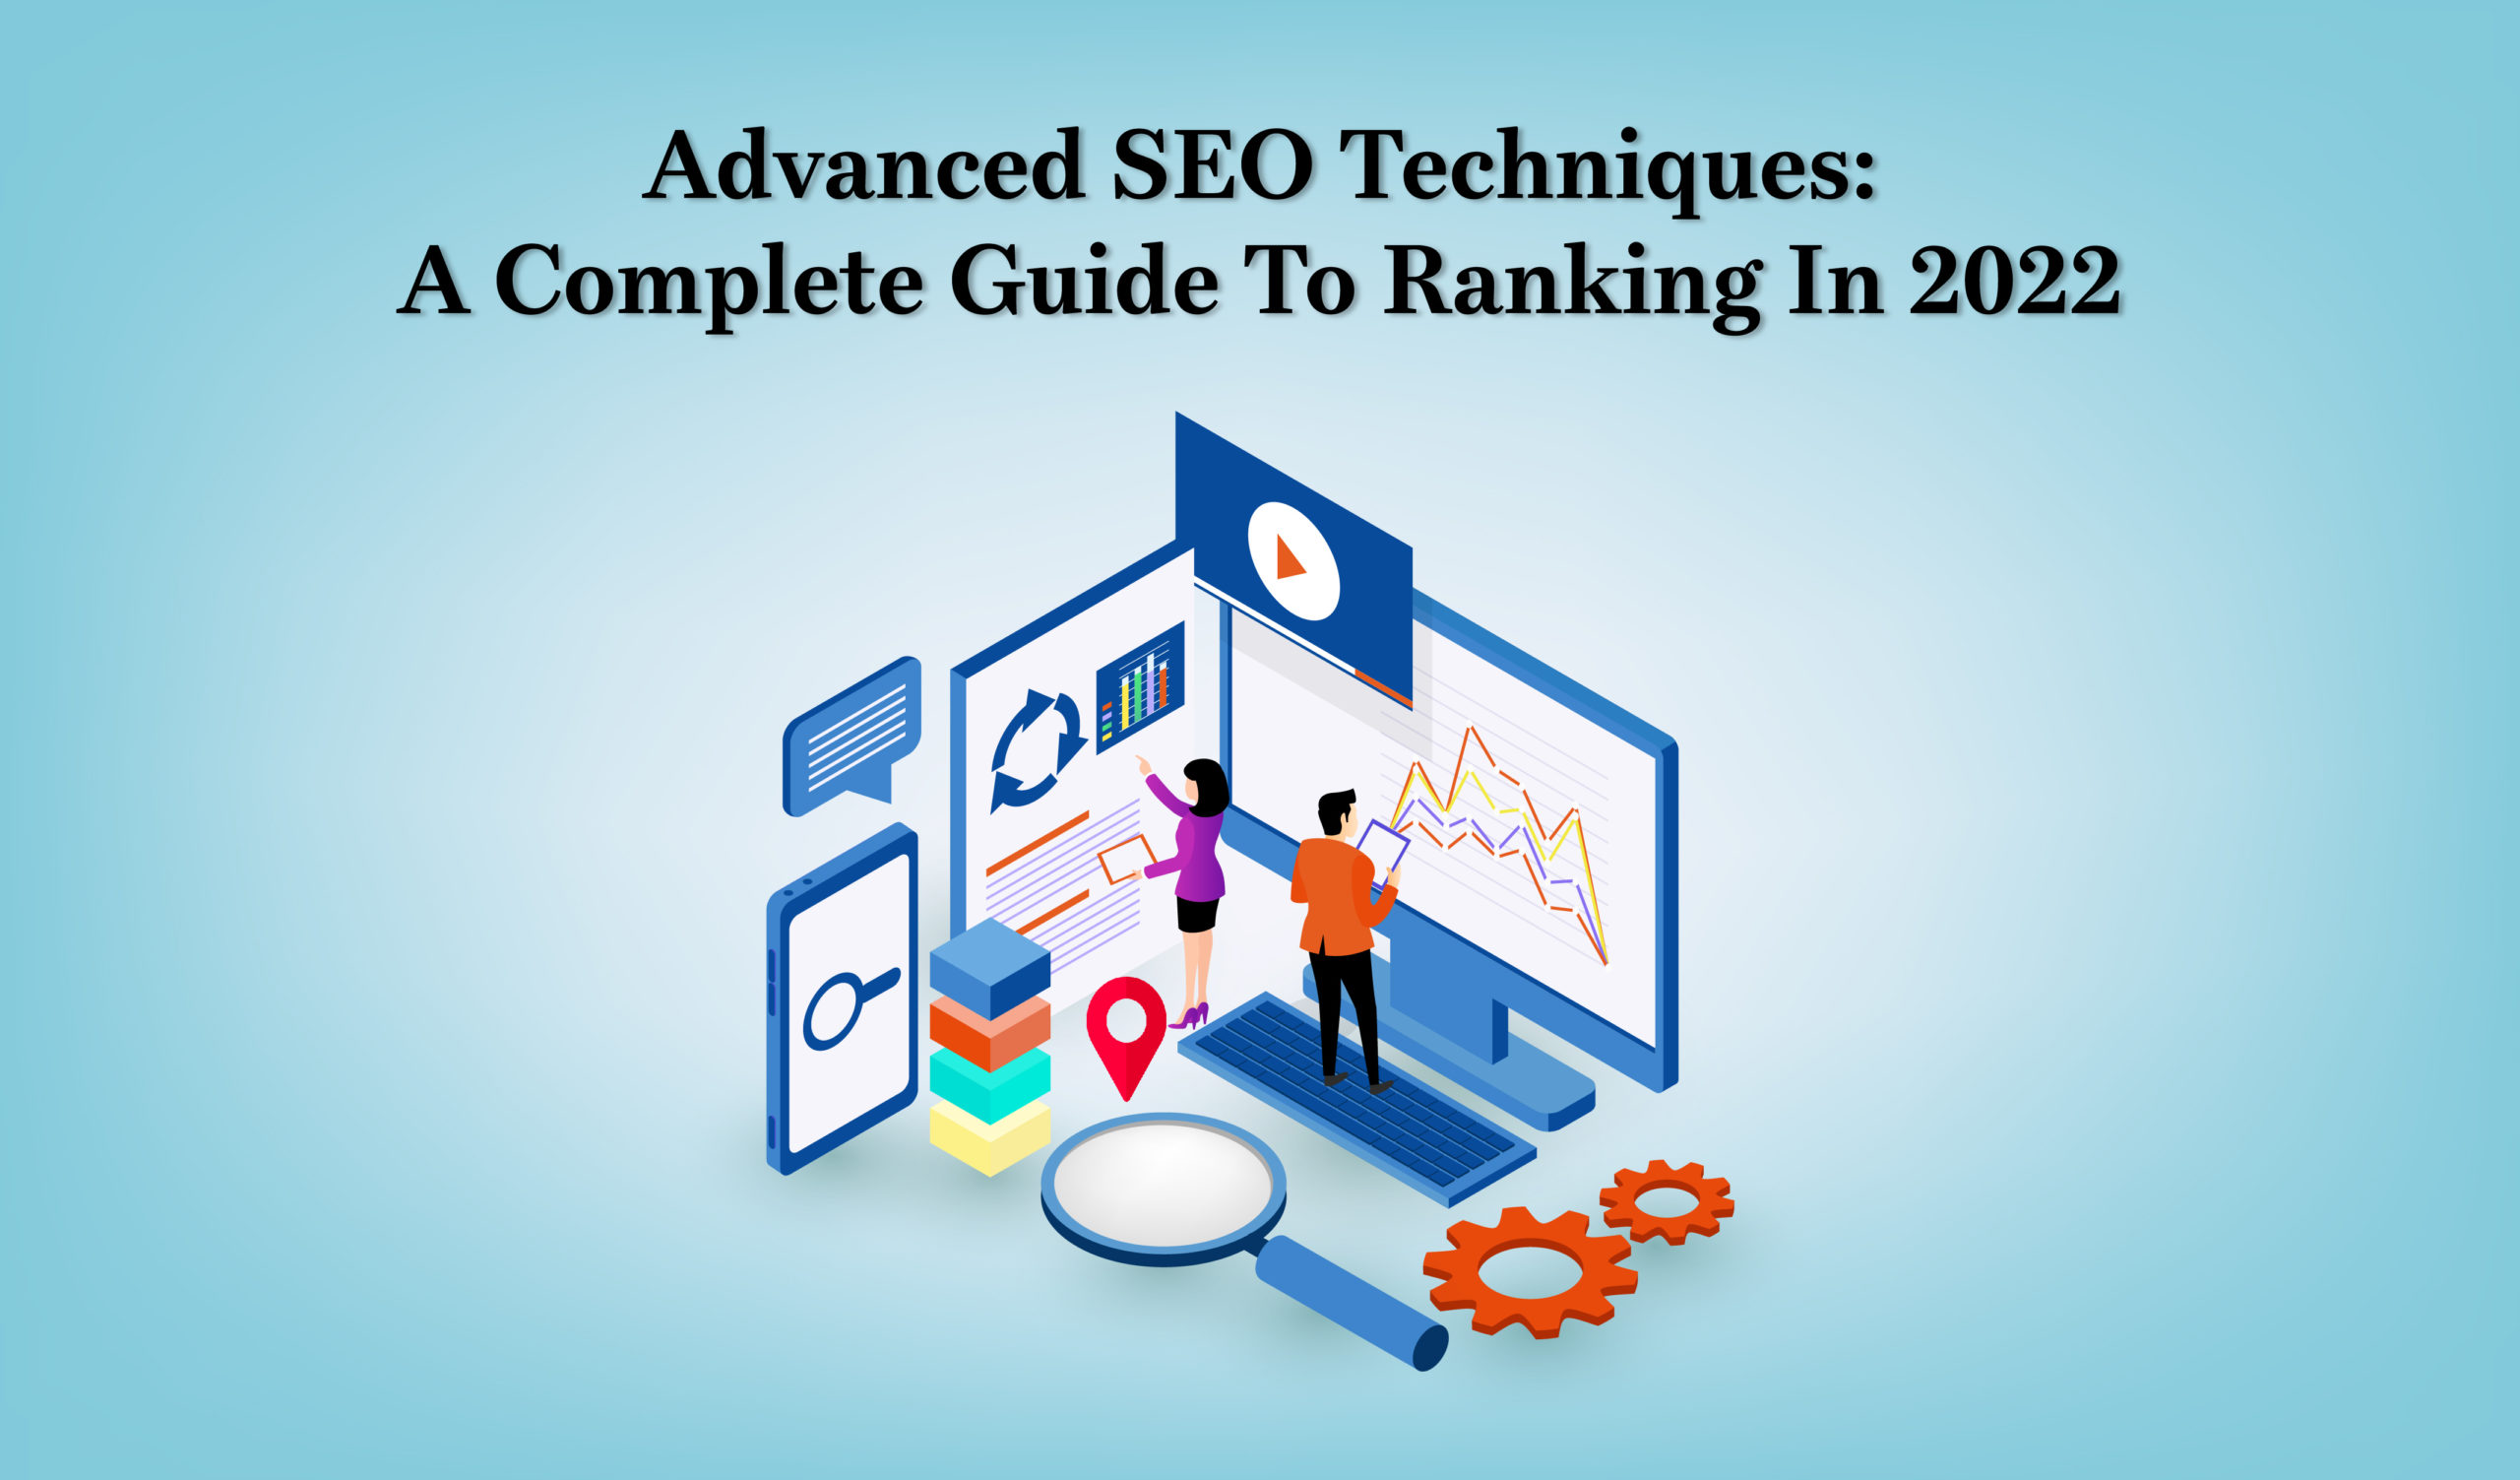 Advanced SEO Techniques: A Complete Guide to Ranking in 2022